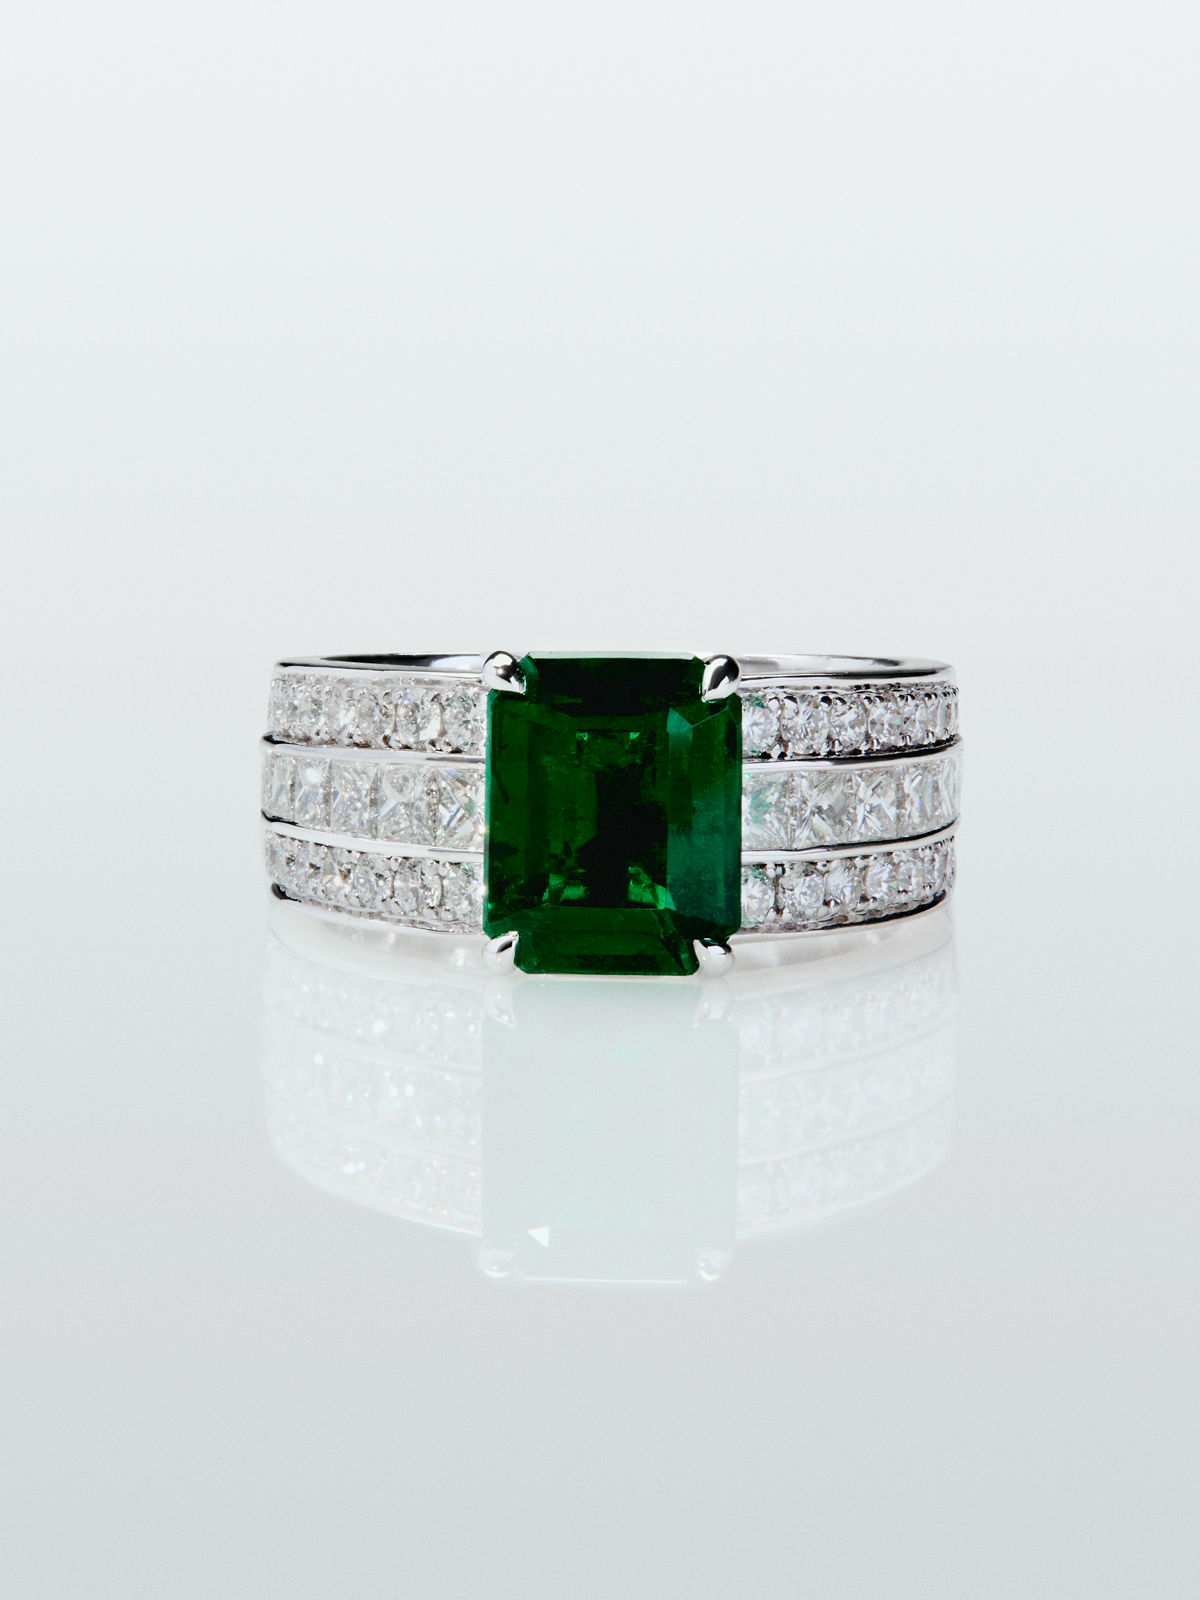 18K white gold ring with octagonal cut emerald of 2.522 cts, 44 brilliant cut diamonds with a total of 0.81 cts and 12 princess cut diamonds with a total of 0.76 cts